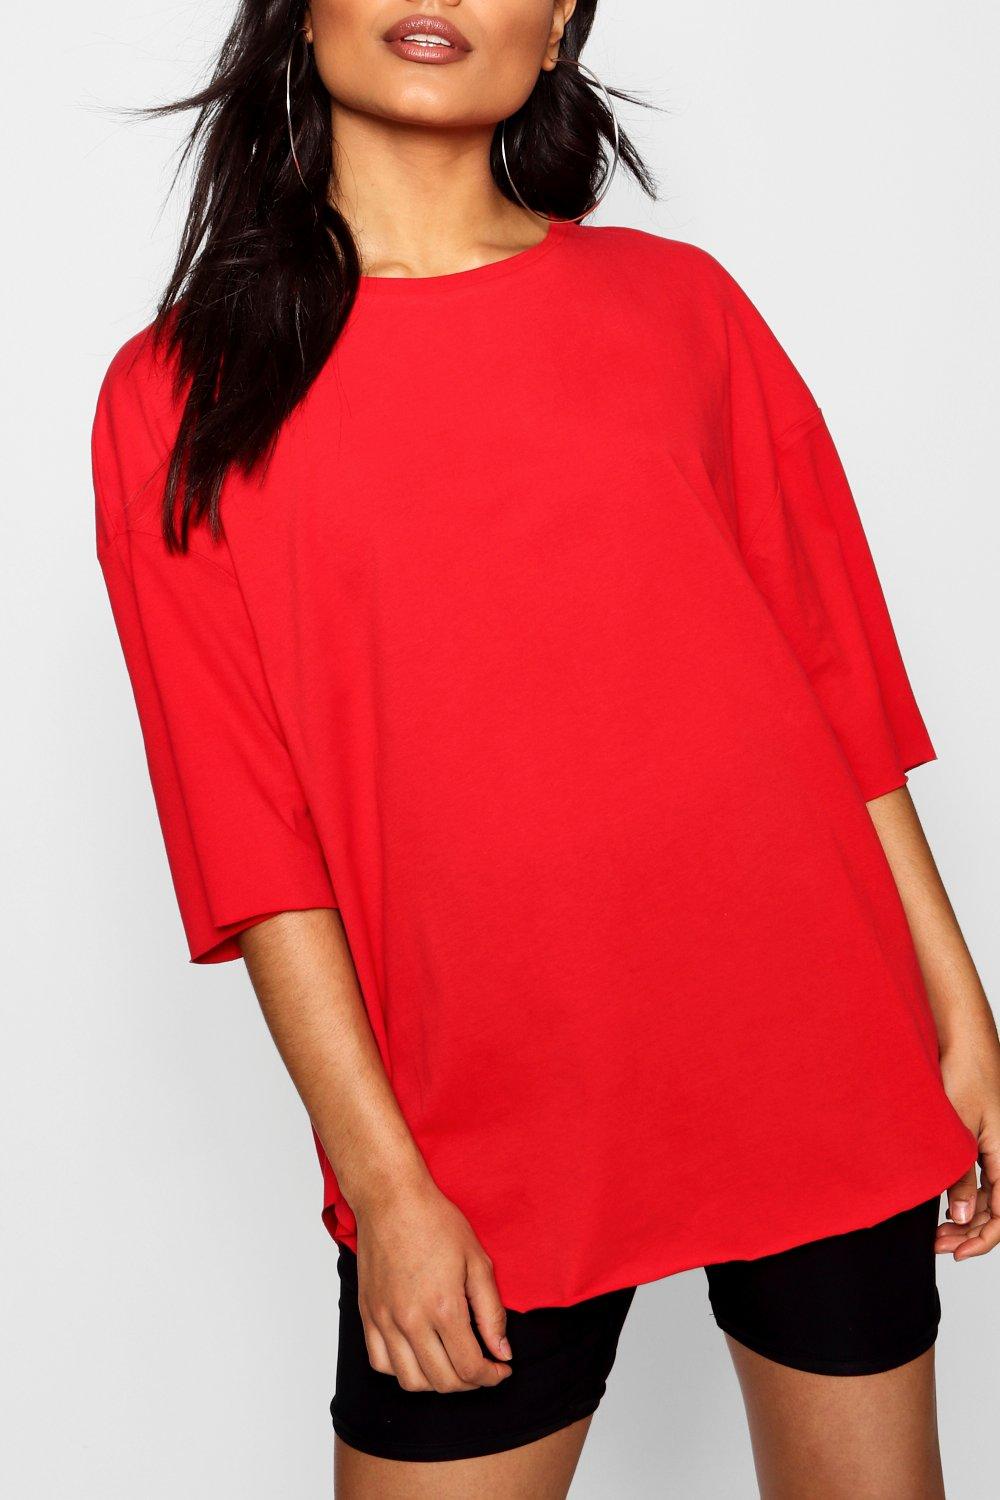 black and red oversized t shirt